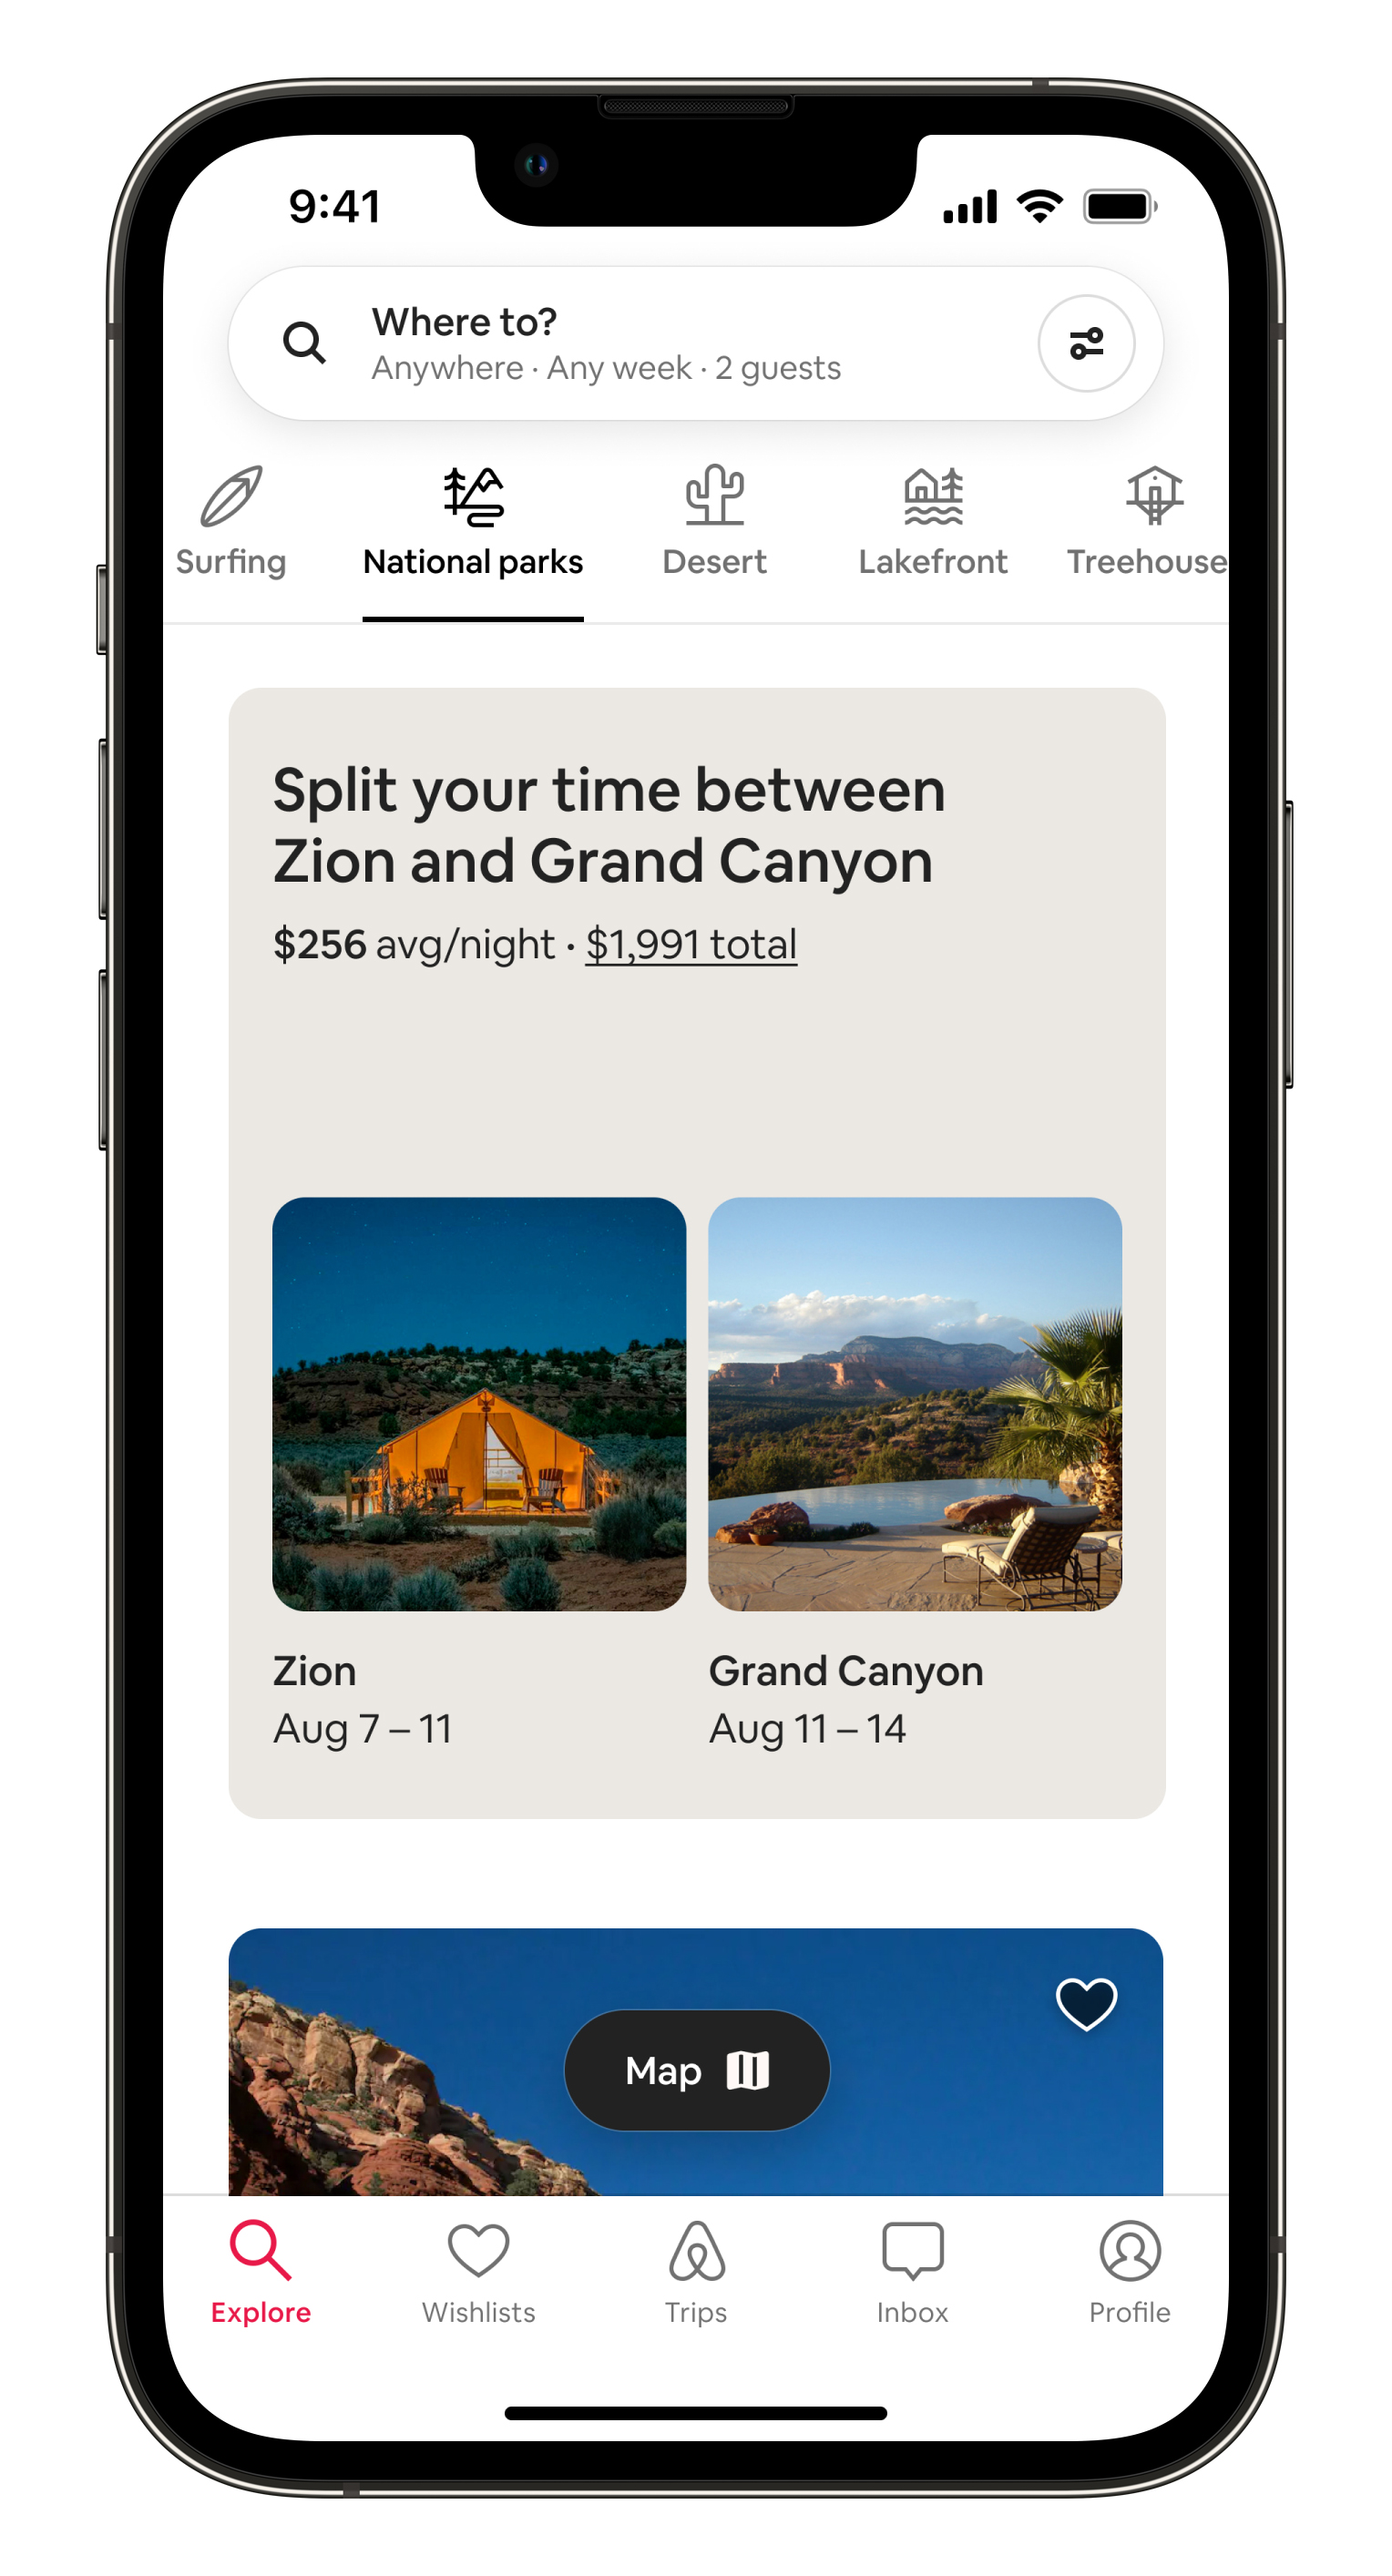 The Split Stays National Parks feature in an iPhone mobile device, showing a glamping tent stay near Zion National Park and a home near Grand Canyon